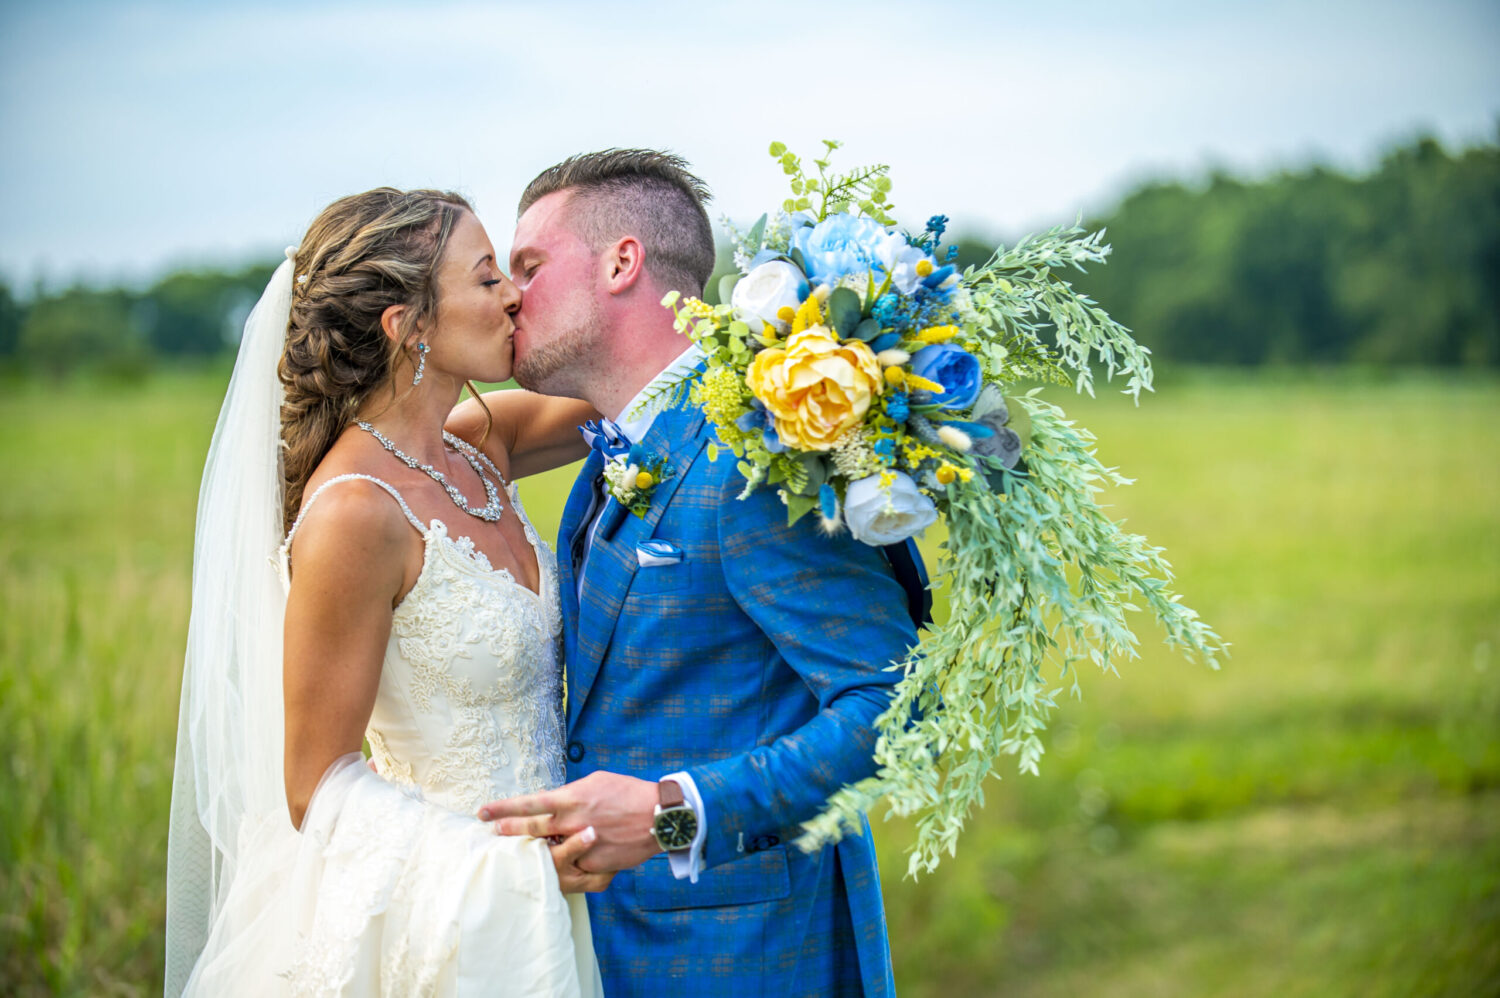 A bride holding a huge beautiful bouquet kissing her groom on their wedding day. Colorful. Family and wedding photography in Pittsburgh.